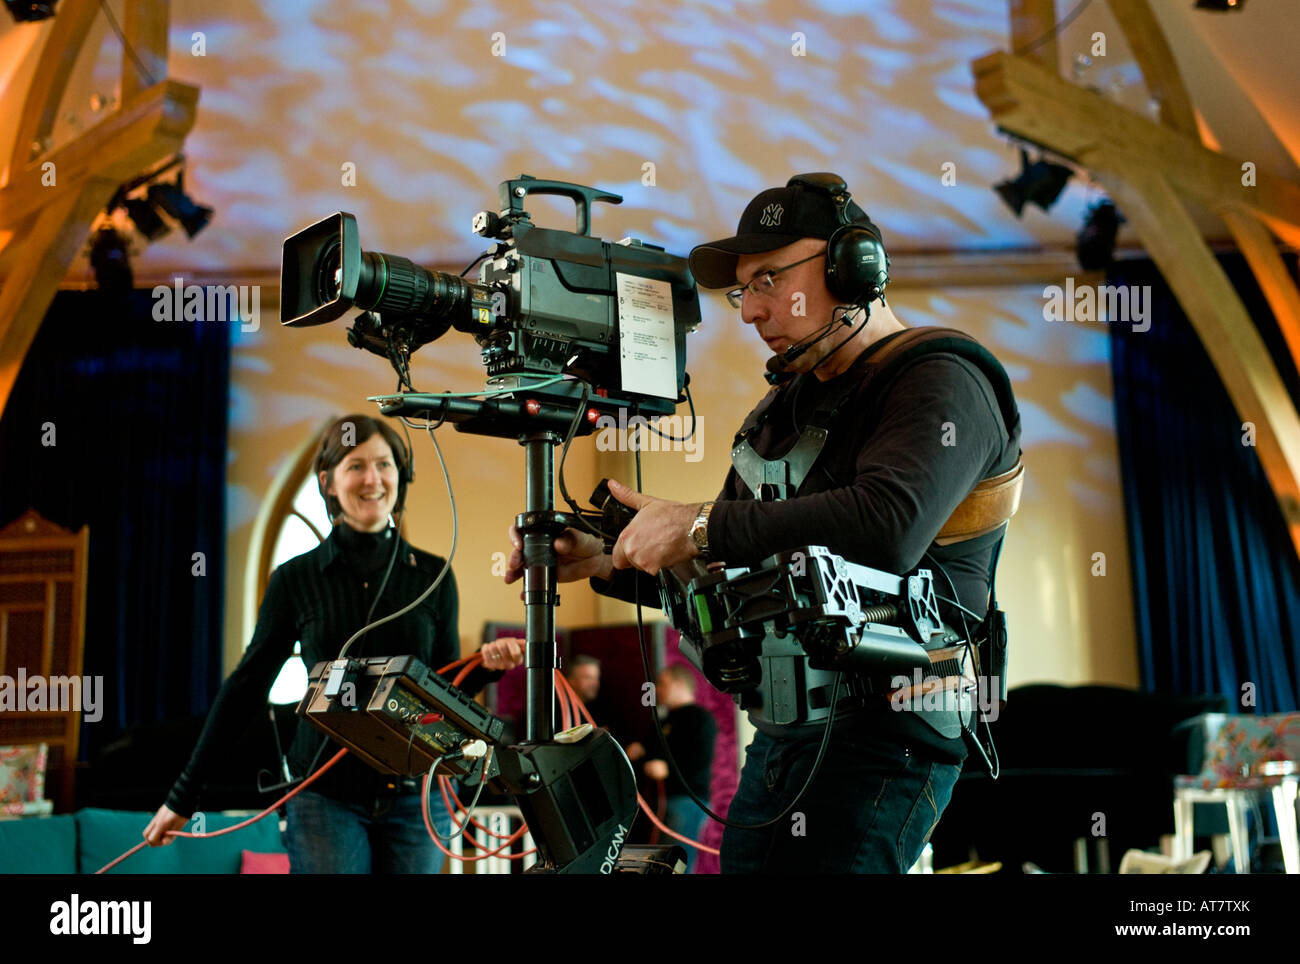 A S4C Cameraman operating steadicam steadycam broadcast video camera in television studio with female cable basher assistant UK Stock Photo